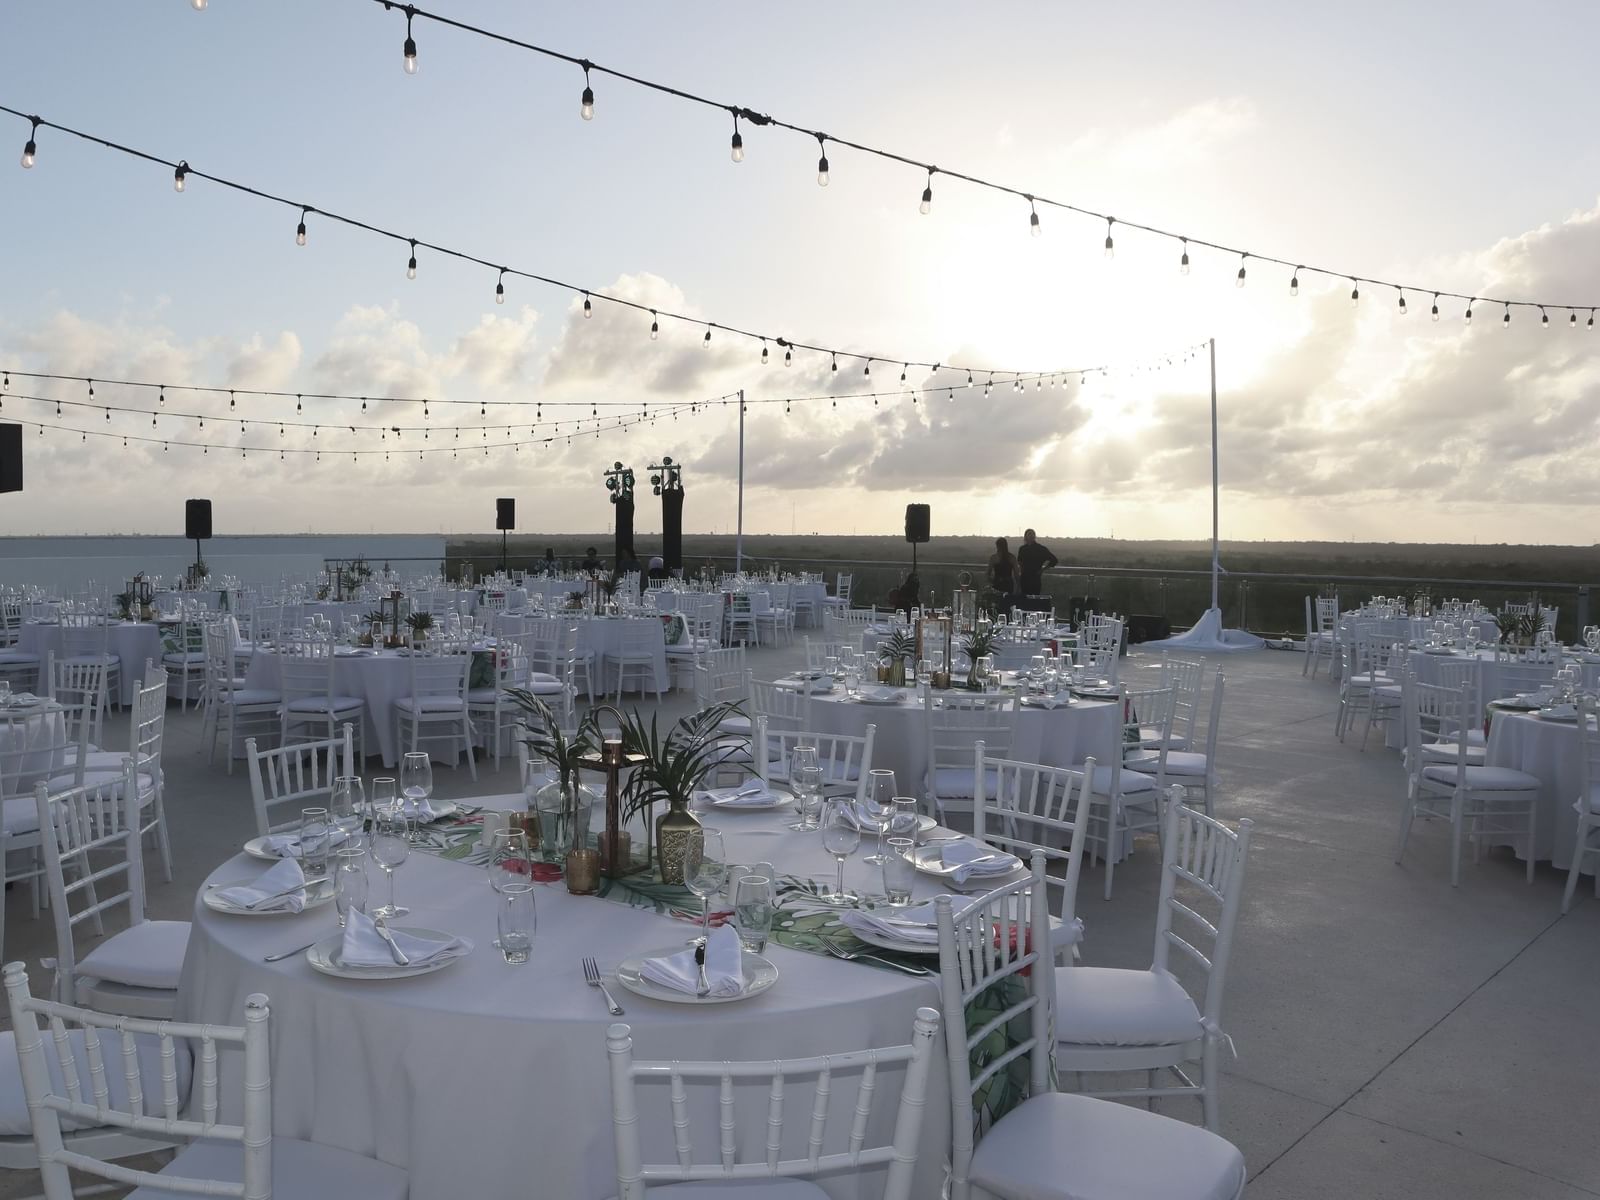 Banquet-style dining tables set-up in sunset terrace at Haven Riviera Cancun